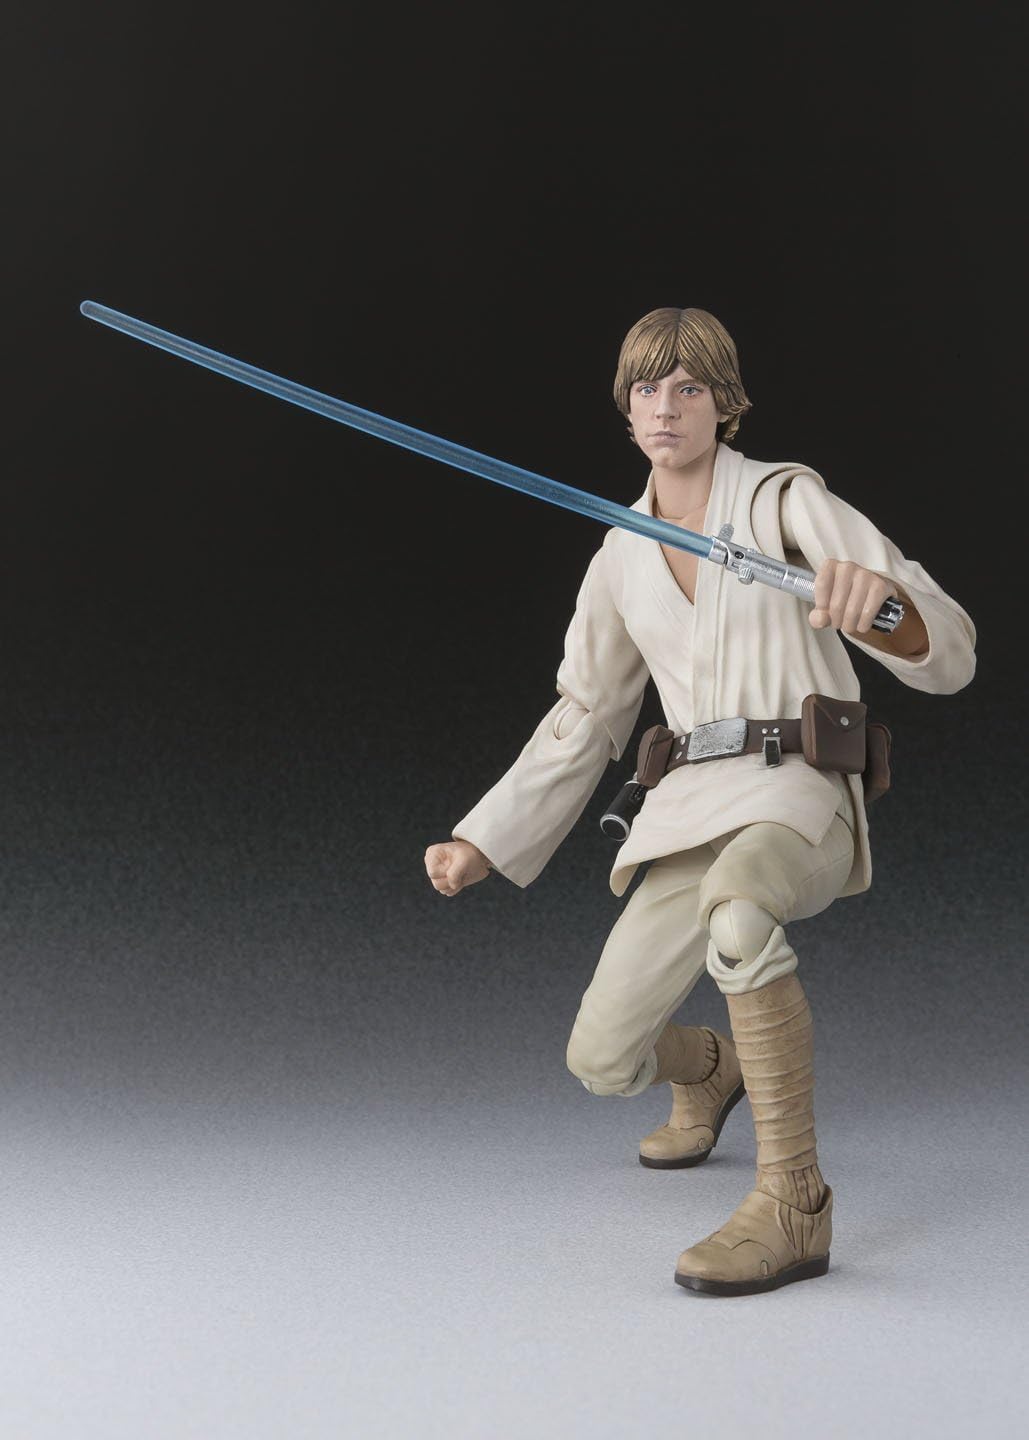 S.H.フィギュアーツ Star Wars: Episode IV A New Hope ルーク・スカイウォーカー（A NEW HOPE）（再販版）約150mm ABS&PVC製 塗装済み可動フィギュア - BanzaiHobby